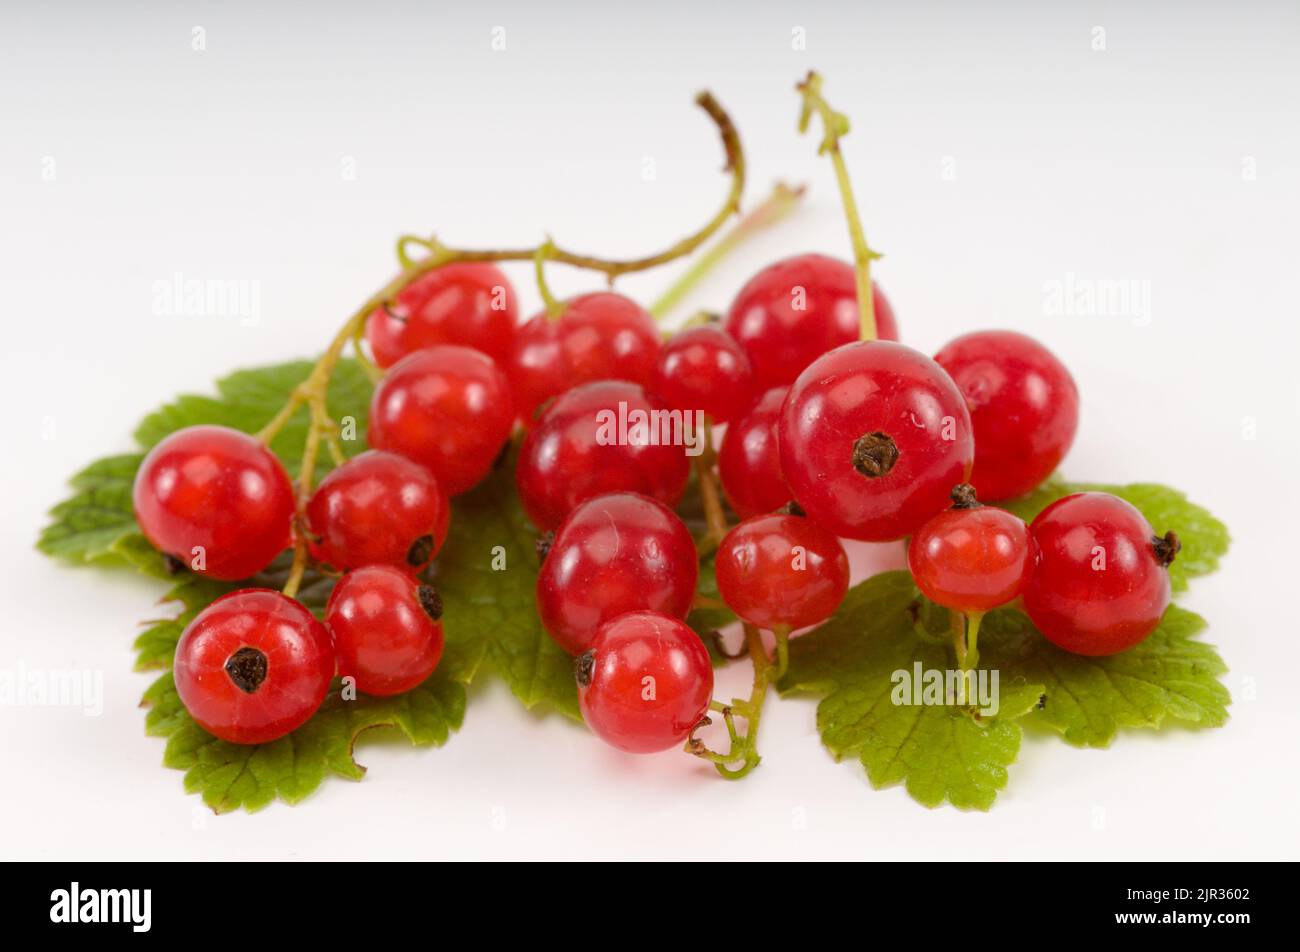 Red currant berries isolated on white background Stock Photo